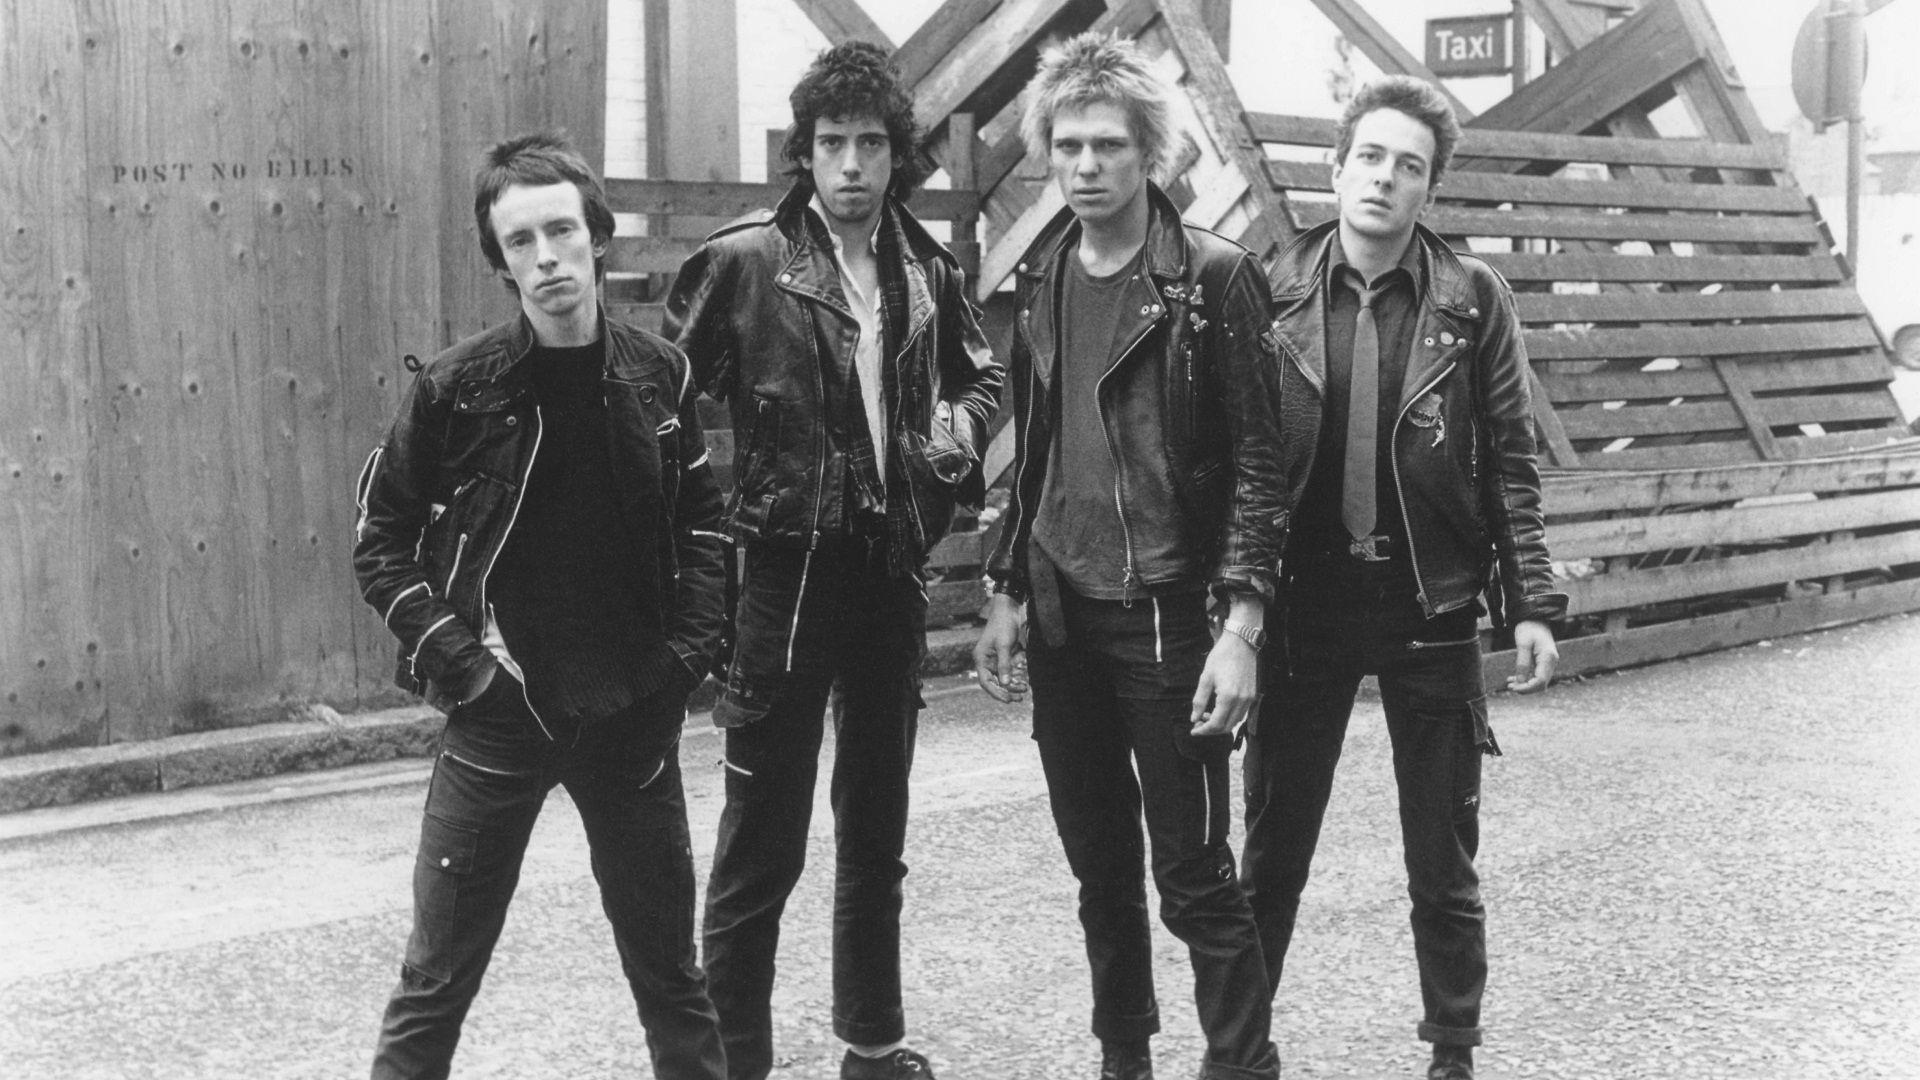 musicians keeping cool in leather jackets. Steve Hoffman